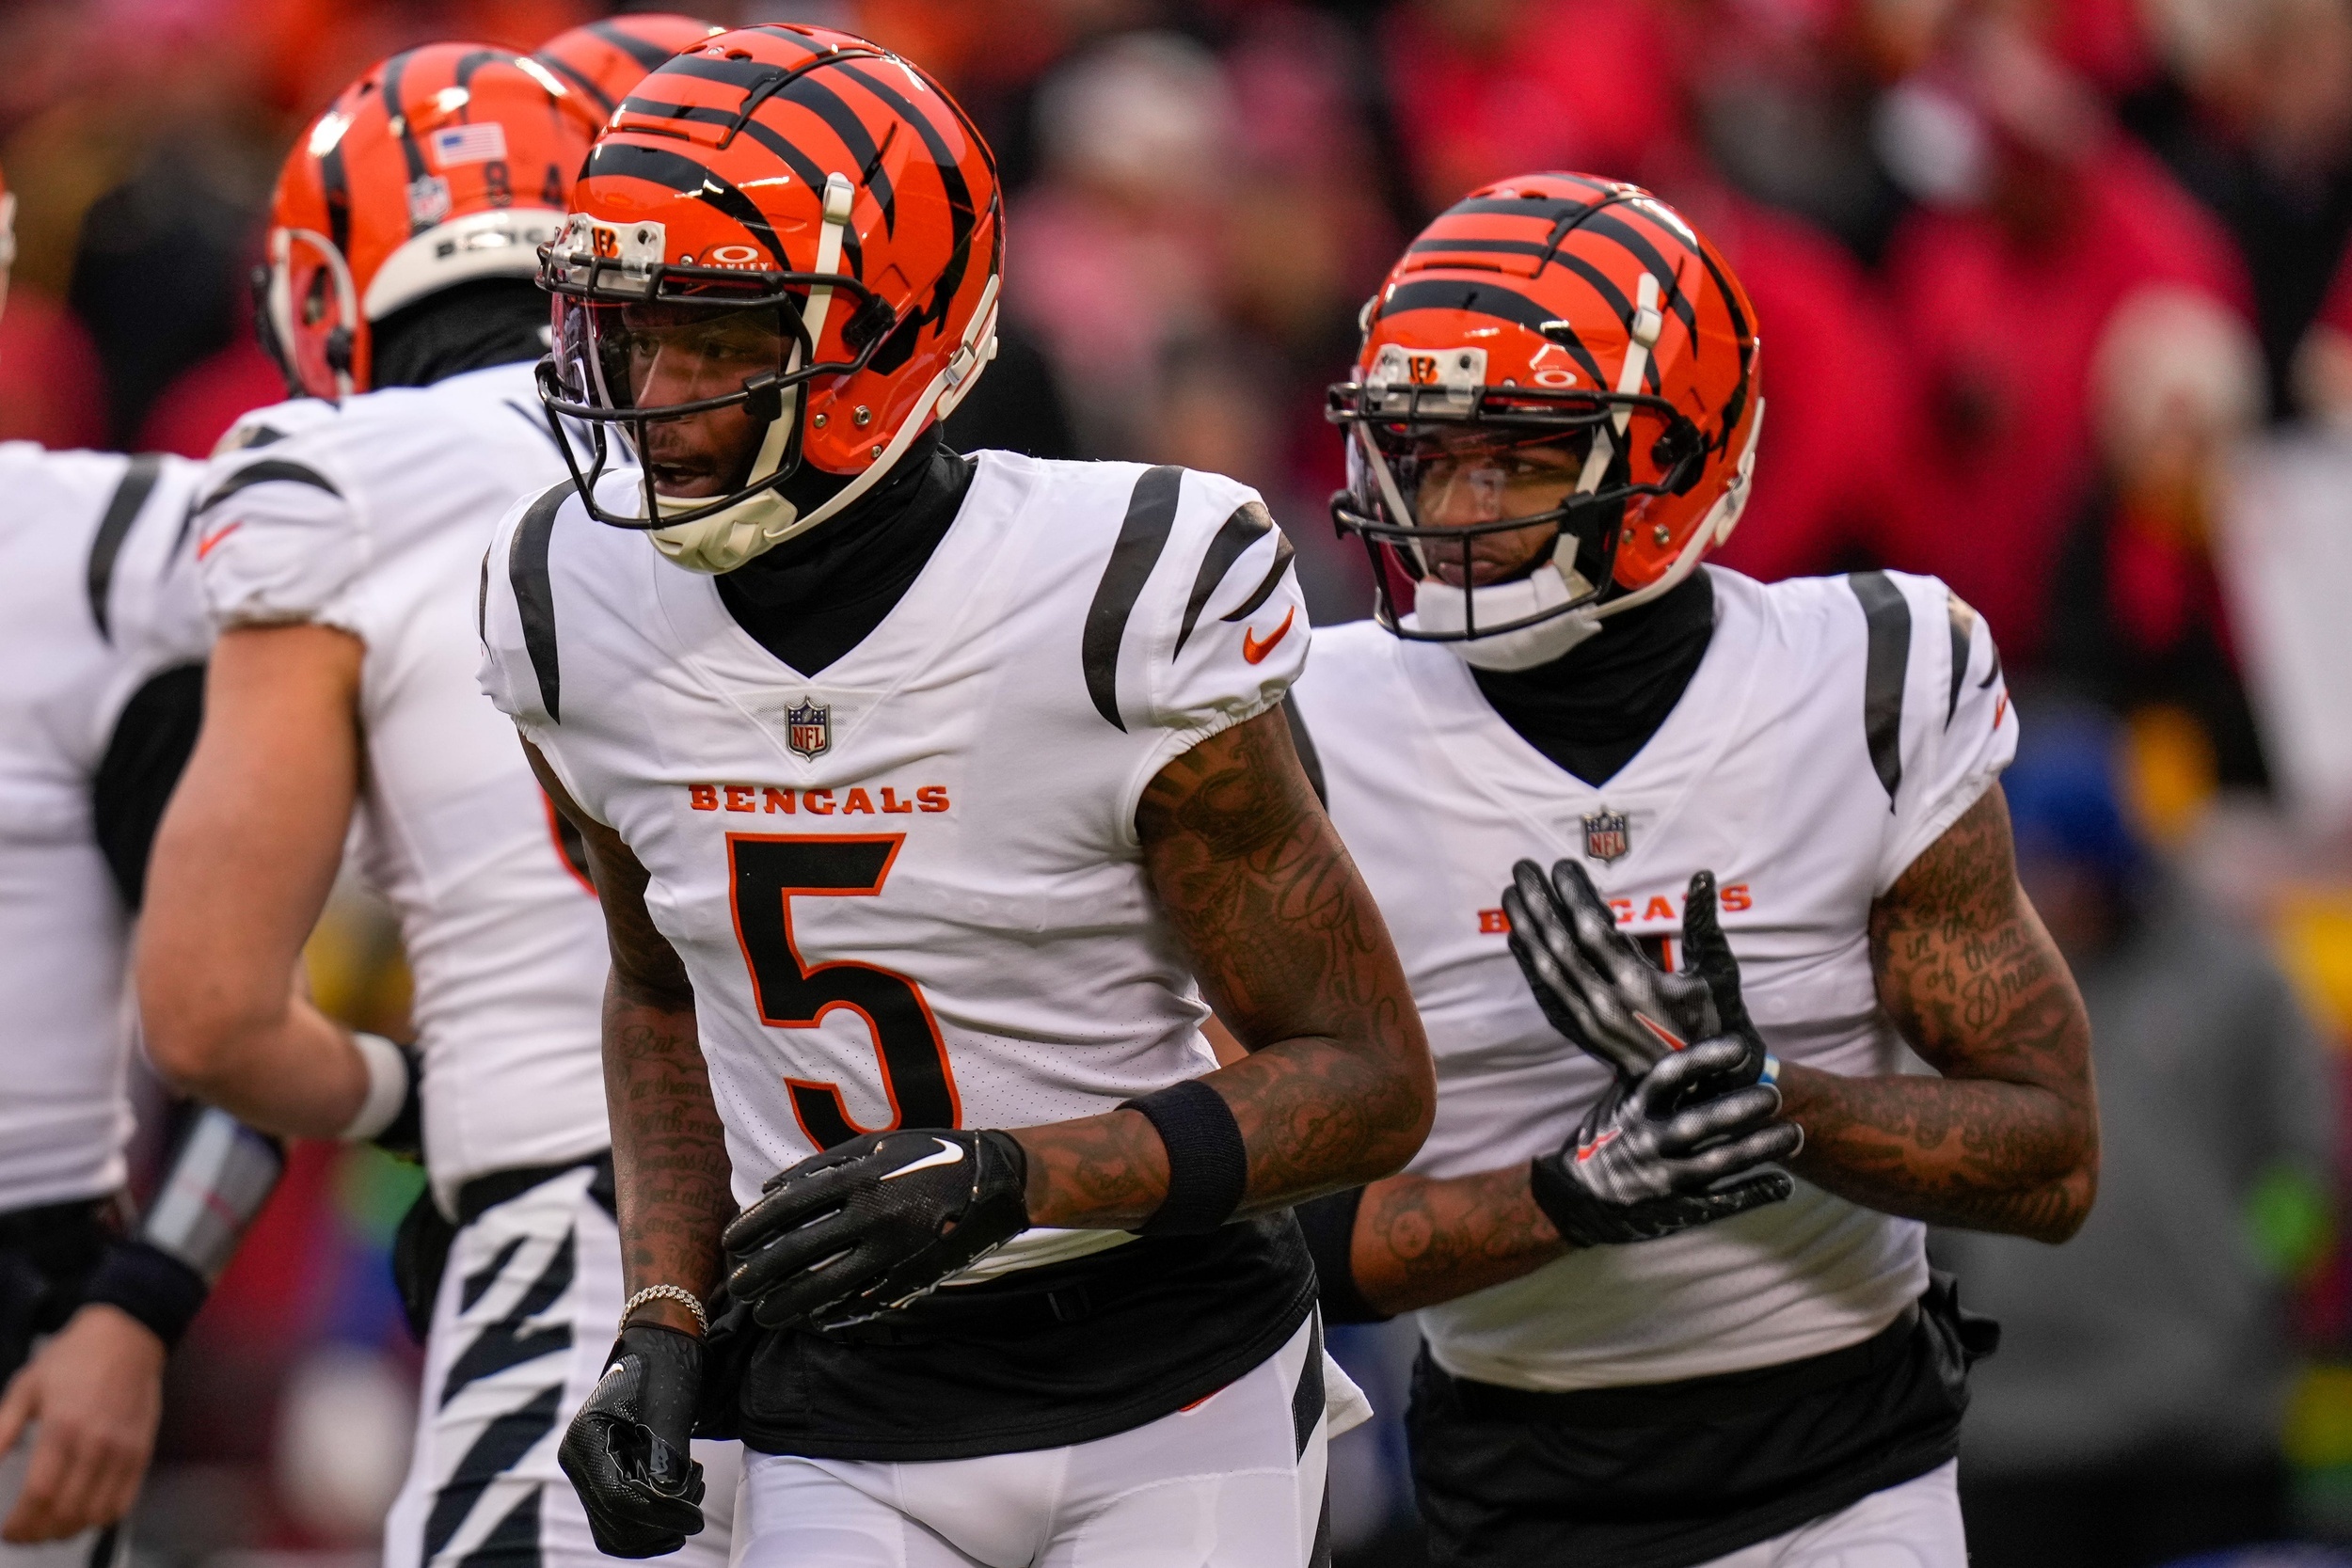 bengals hc, exec open up about extensions for top wrs tee higgins, ja'marr chase